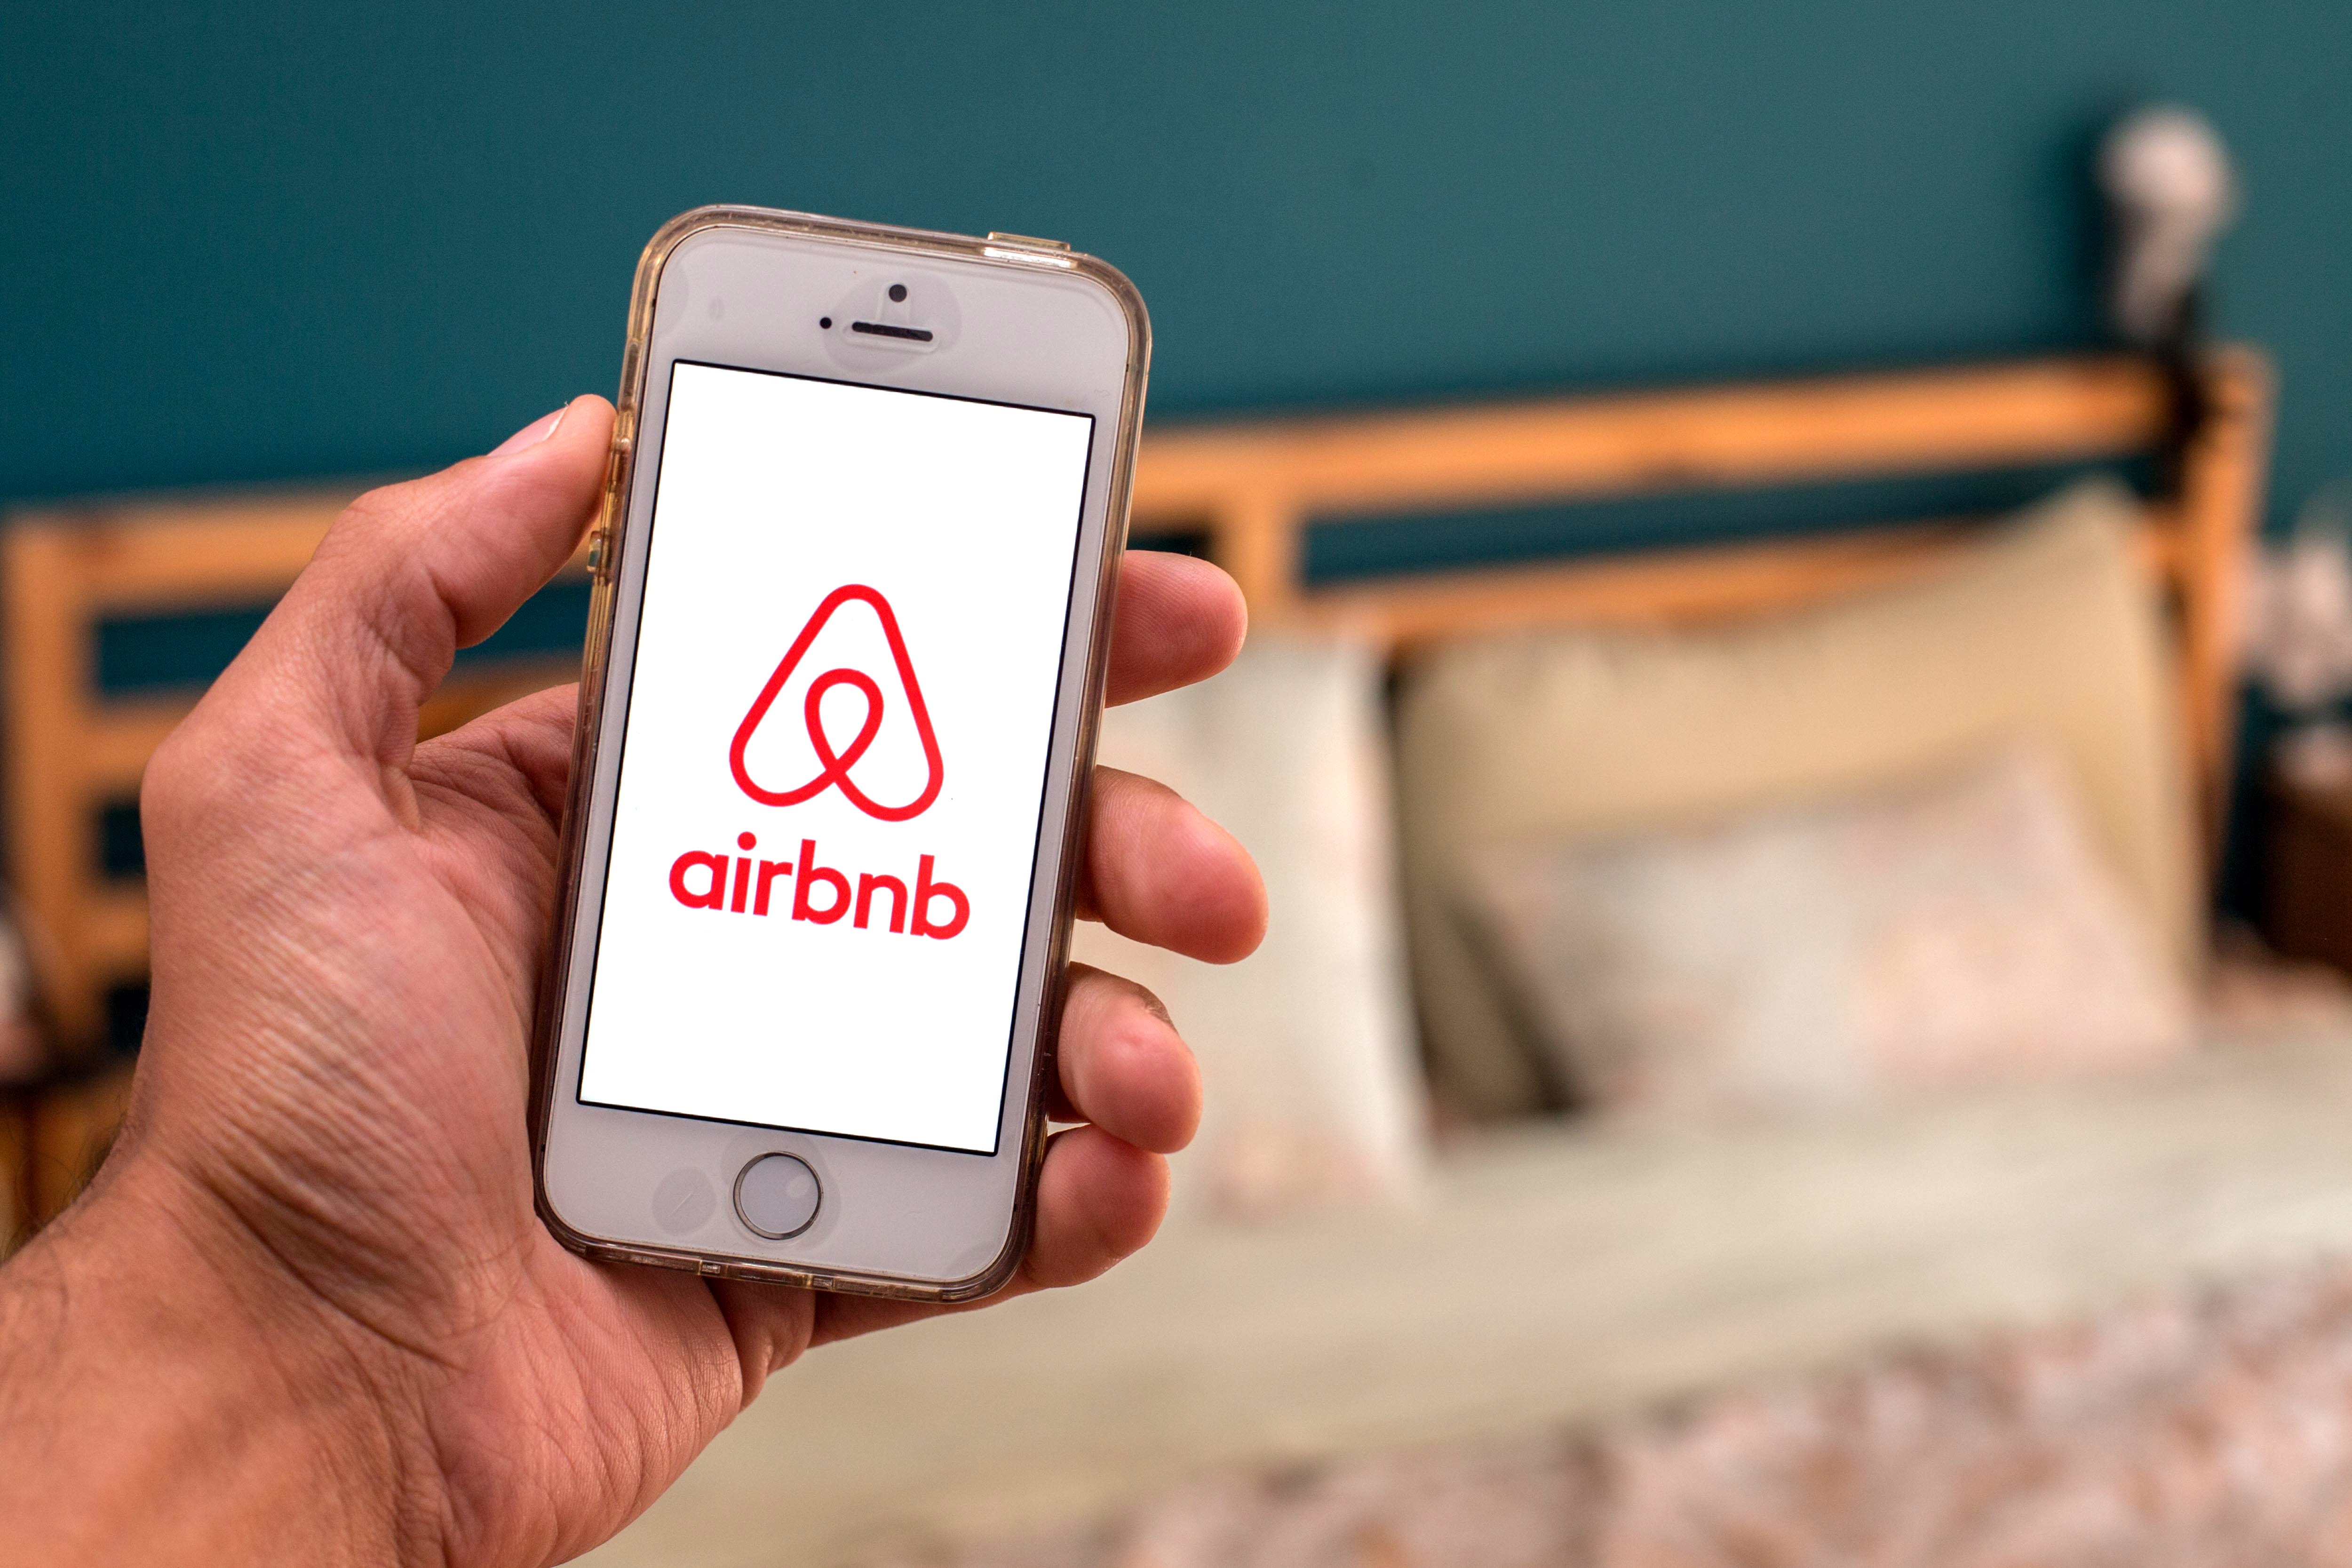 Hidden camera found in bedroom of Airbnb in London, Ont., voyeurism charge laid Globalnews.ca